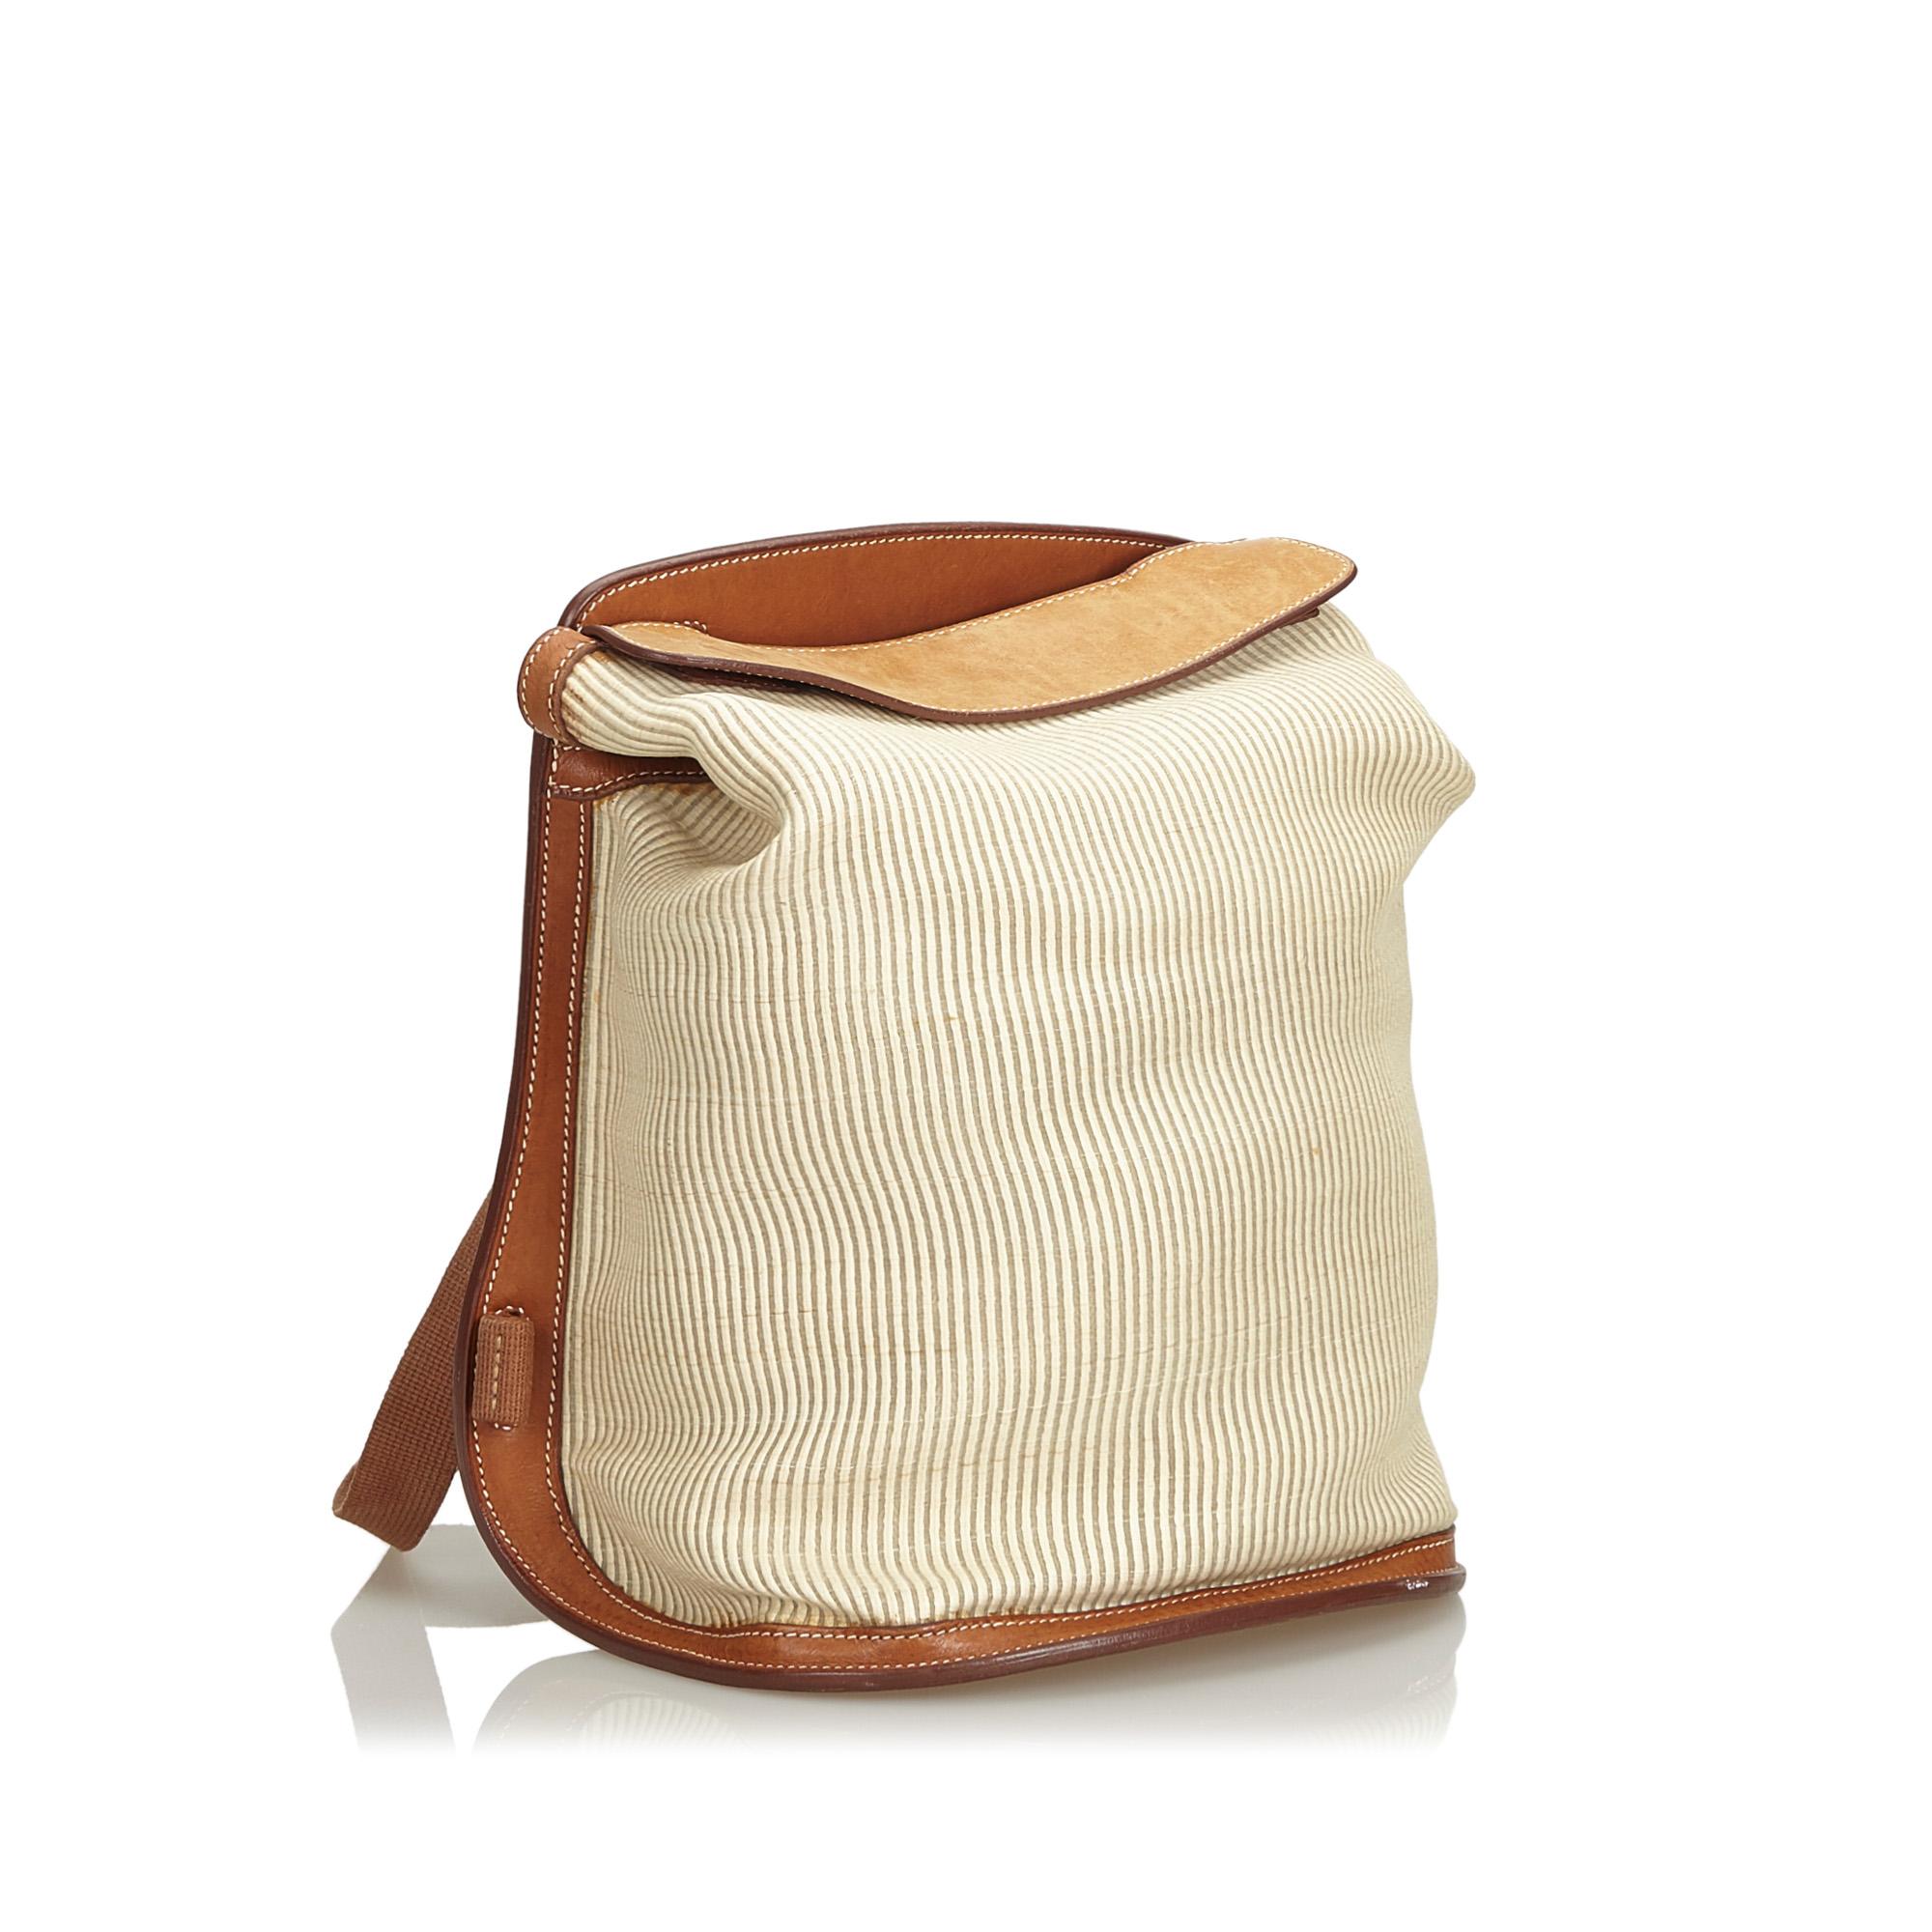 The Sherpa backpack features a canvas body with leather trim, flat back straps, a top leather flap, and an interior slip pocket. It carries as B+ condition rating.

Inclusions: 
This item does not come with inclusions.

Dimensions:
Length: 32.00